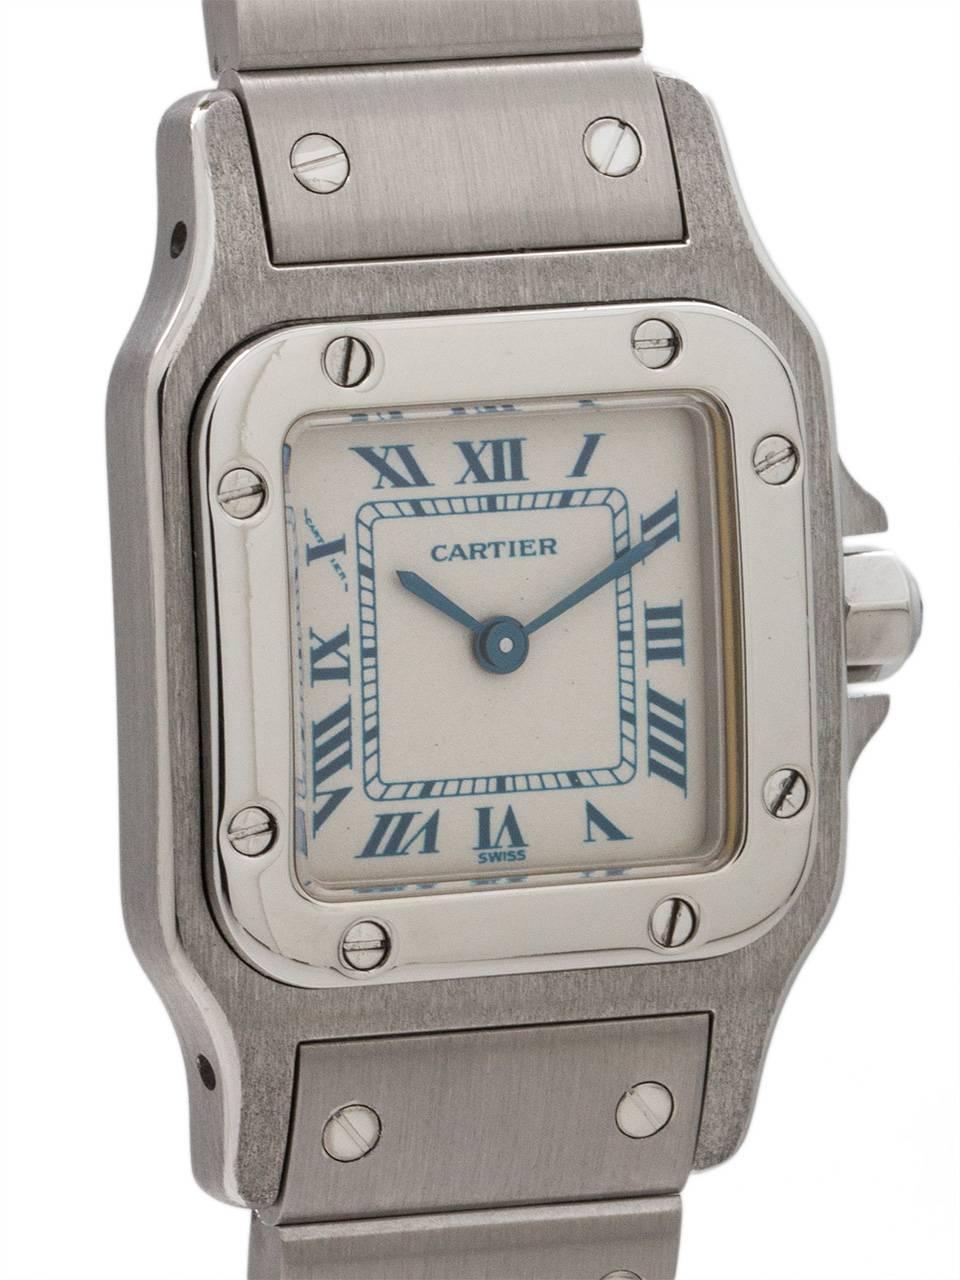 
Cartier Stainless Steel Santos circa 2000s. Square case measuring 24 x 35mm with round corner, screwed down bezel and cabachon sapphire crown. Classic Cartier white dial with blue Roman numerals and blue steeled hands. With battery powered quartz